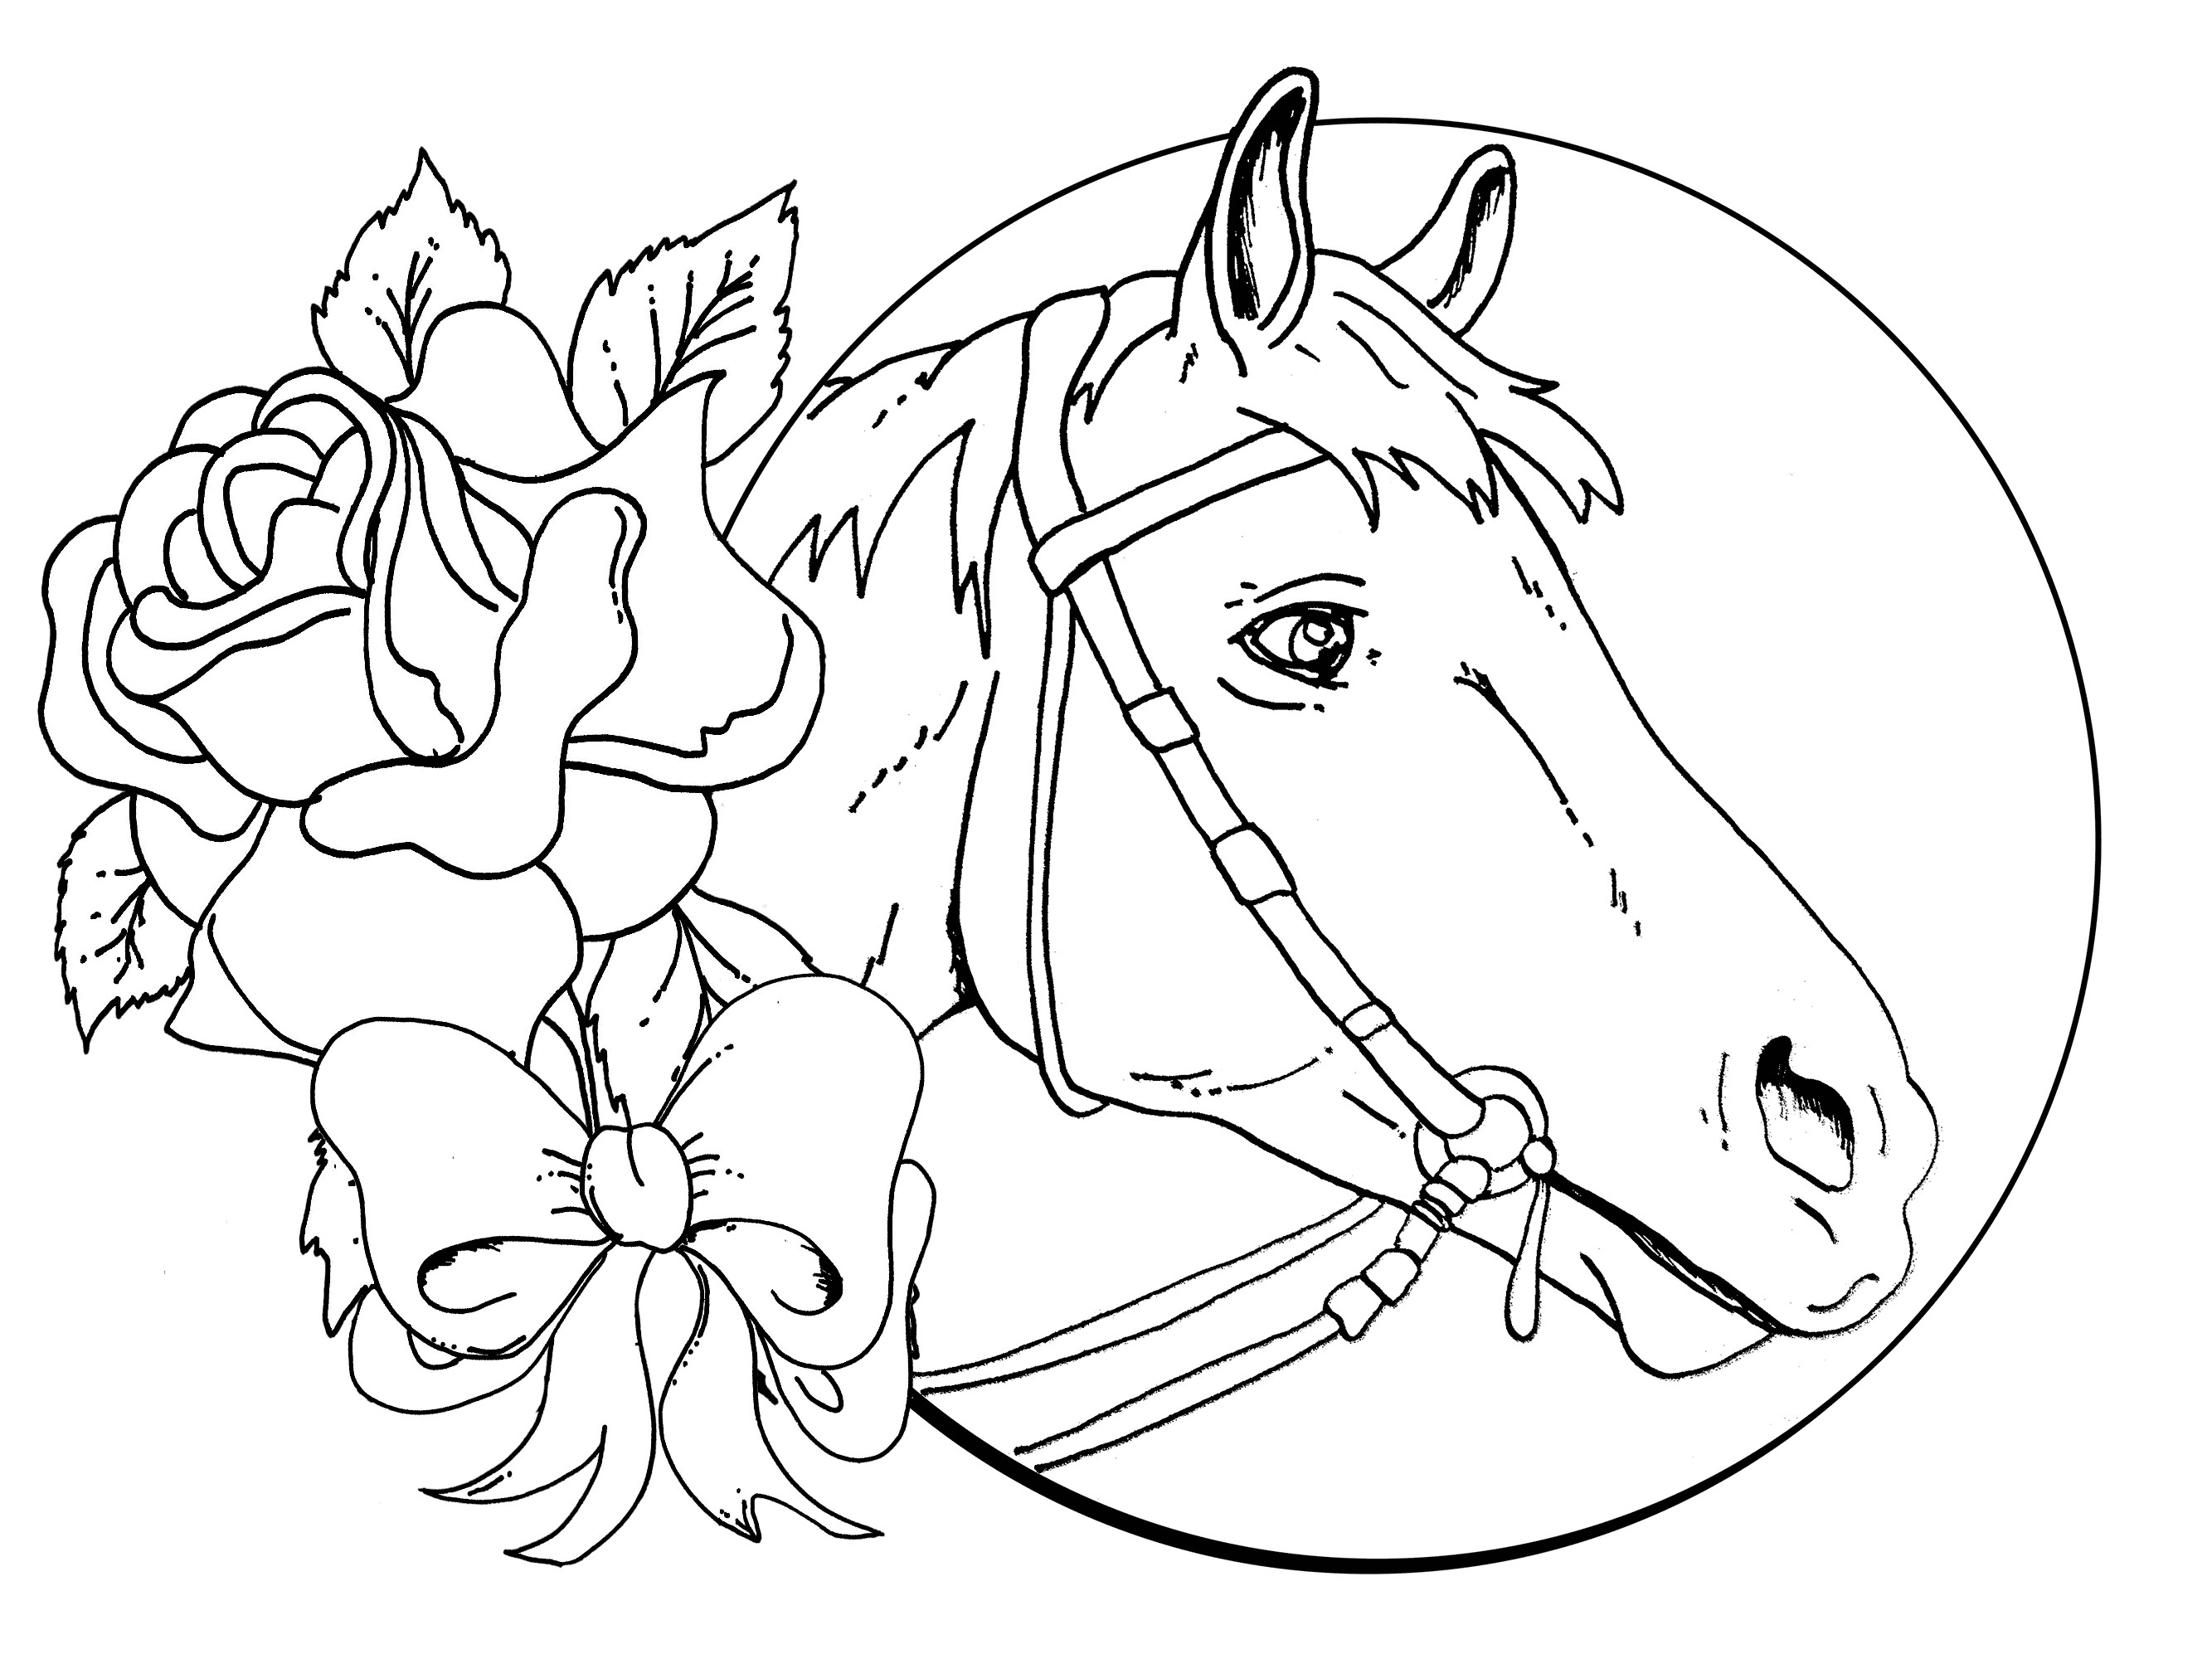 Free Printable Horse Coloring Pages For Adults
 Coloring Pages Horses Coloring Pages Free Coloring Pages